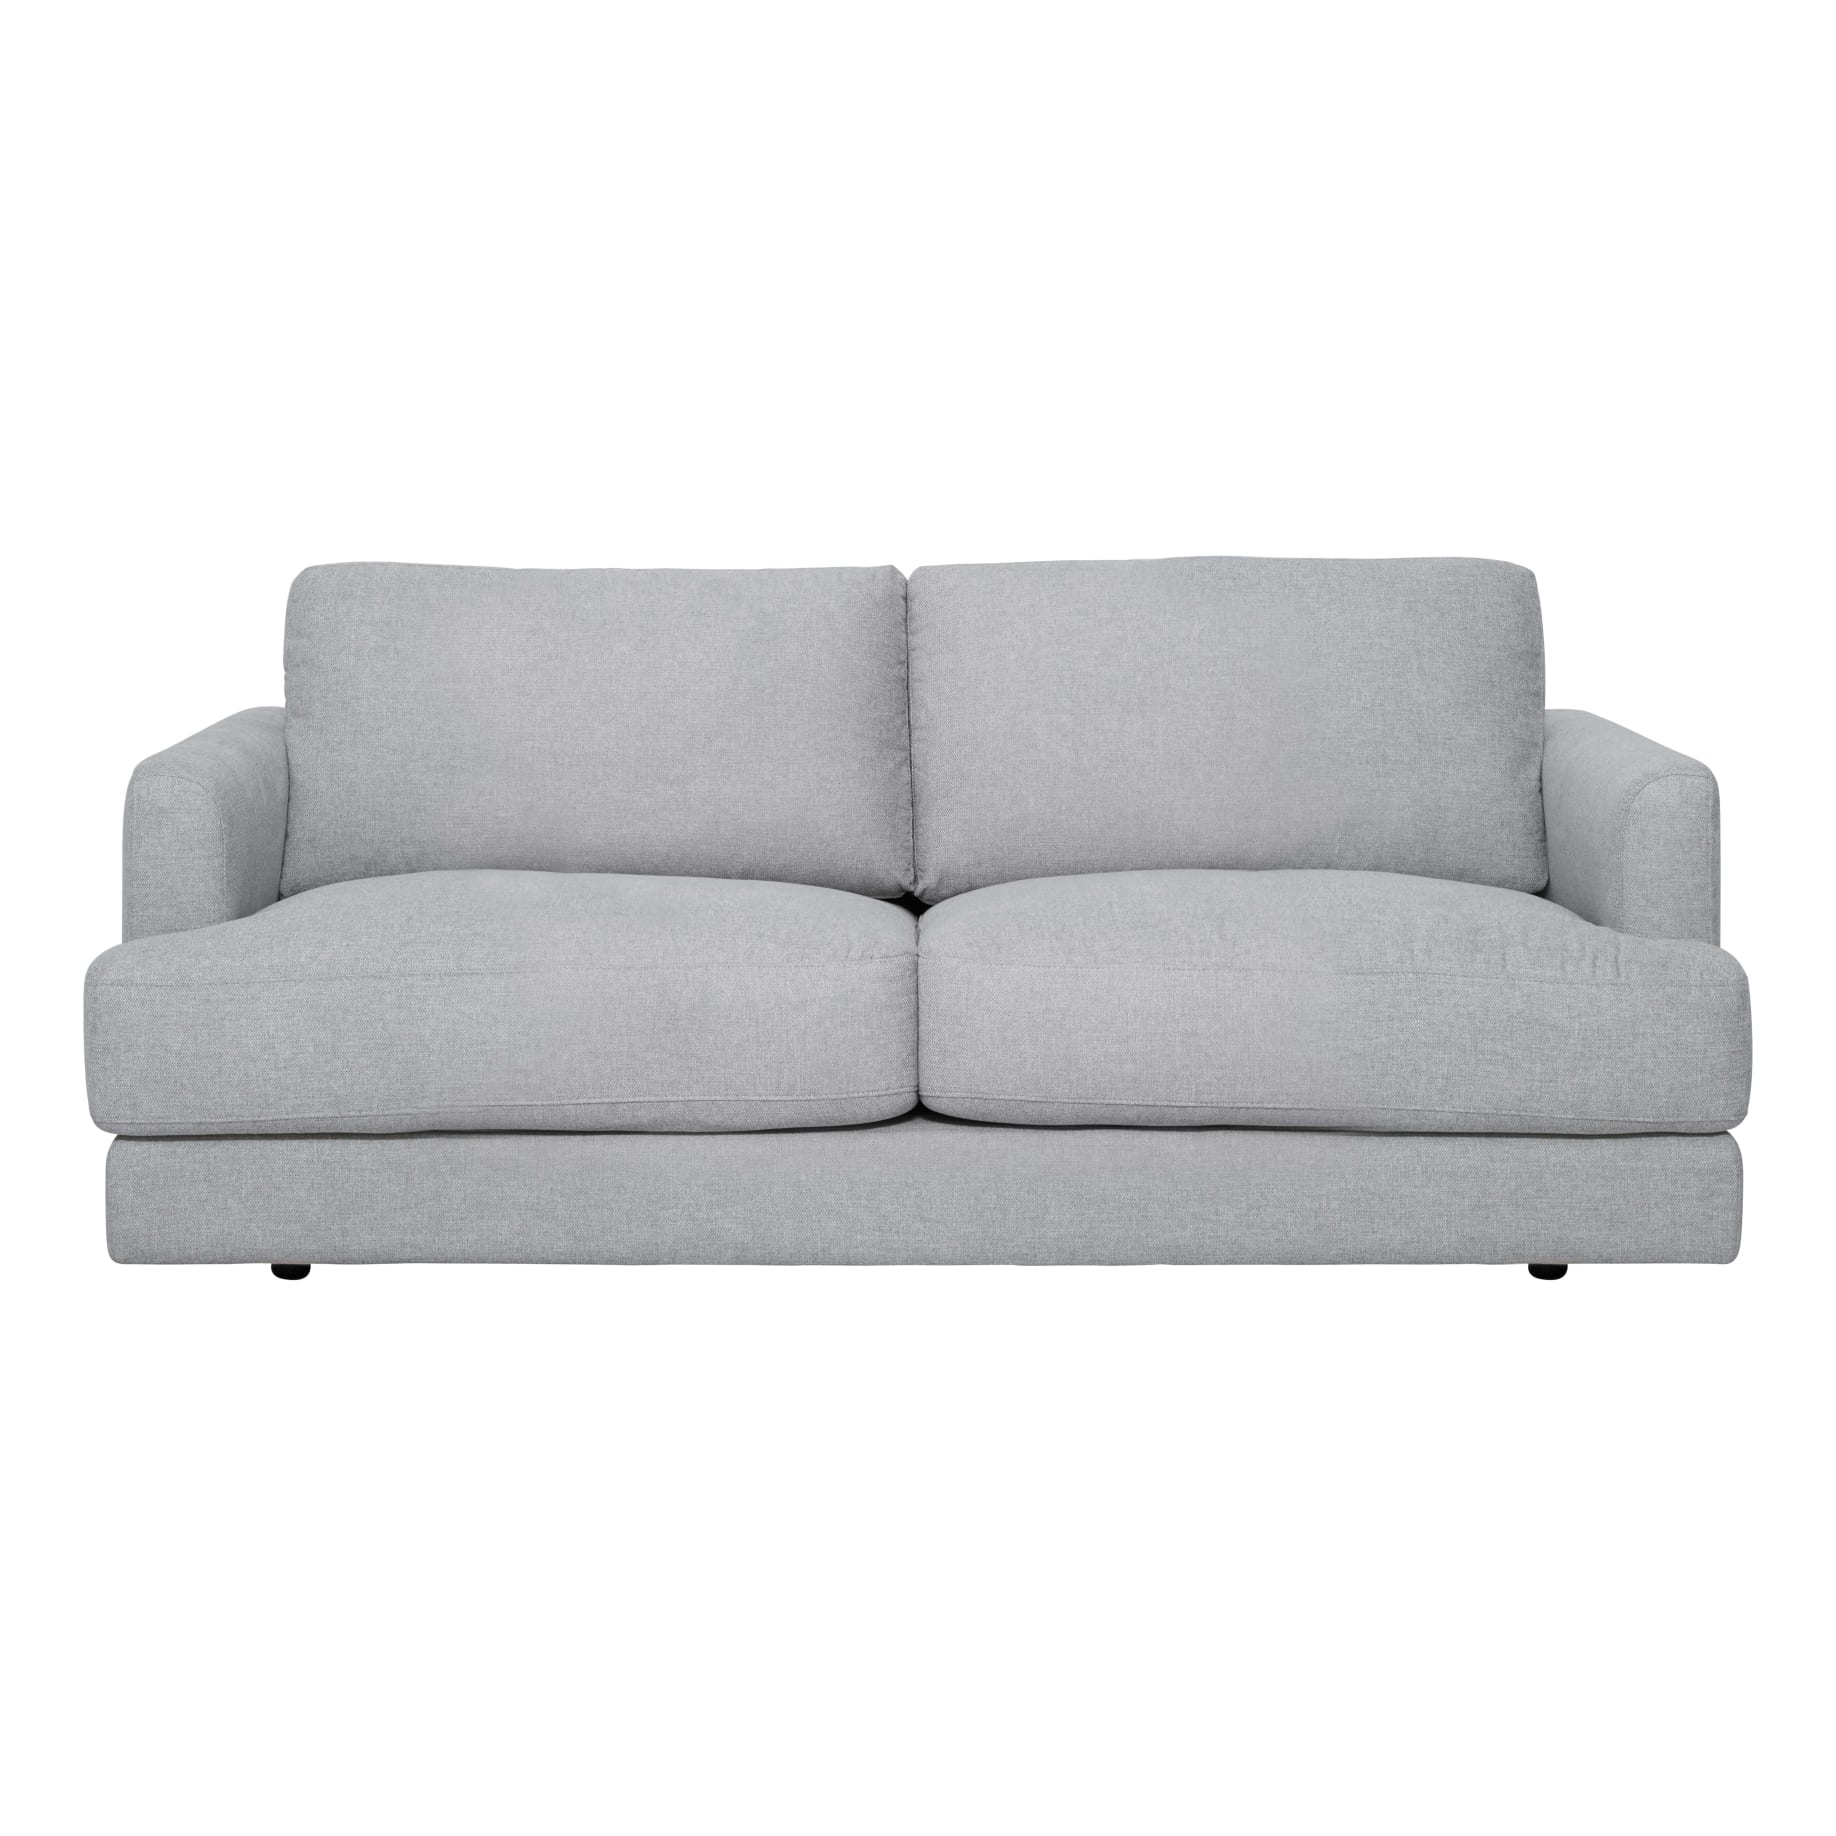 Temple 3 Seater Sofa with 2 Cushions in Belfast Grey